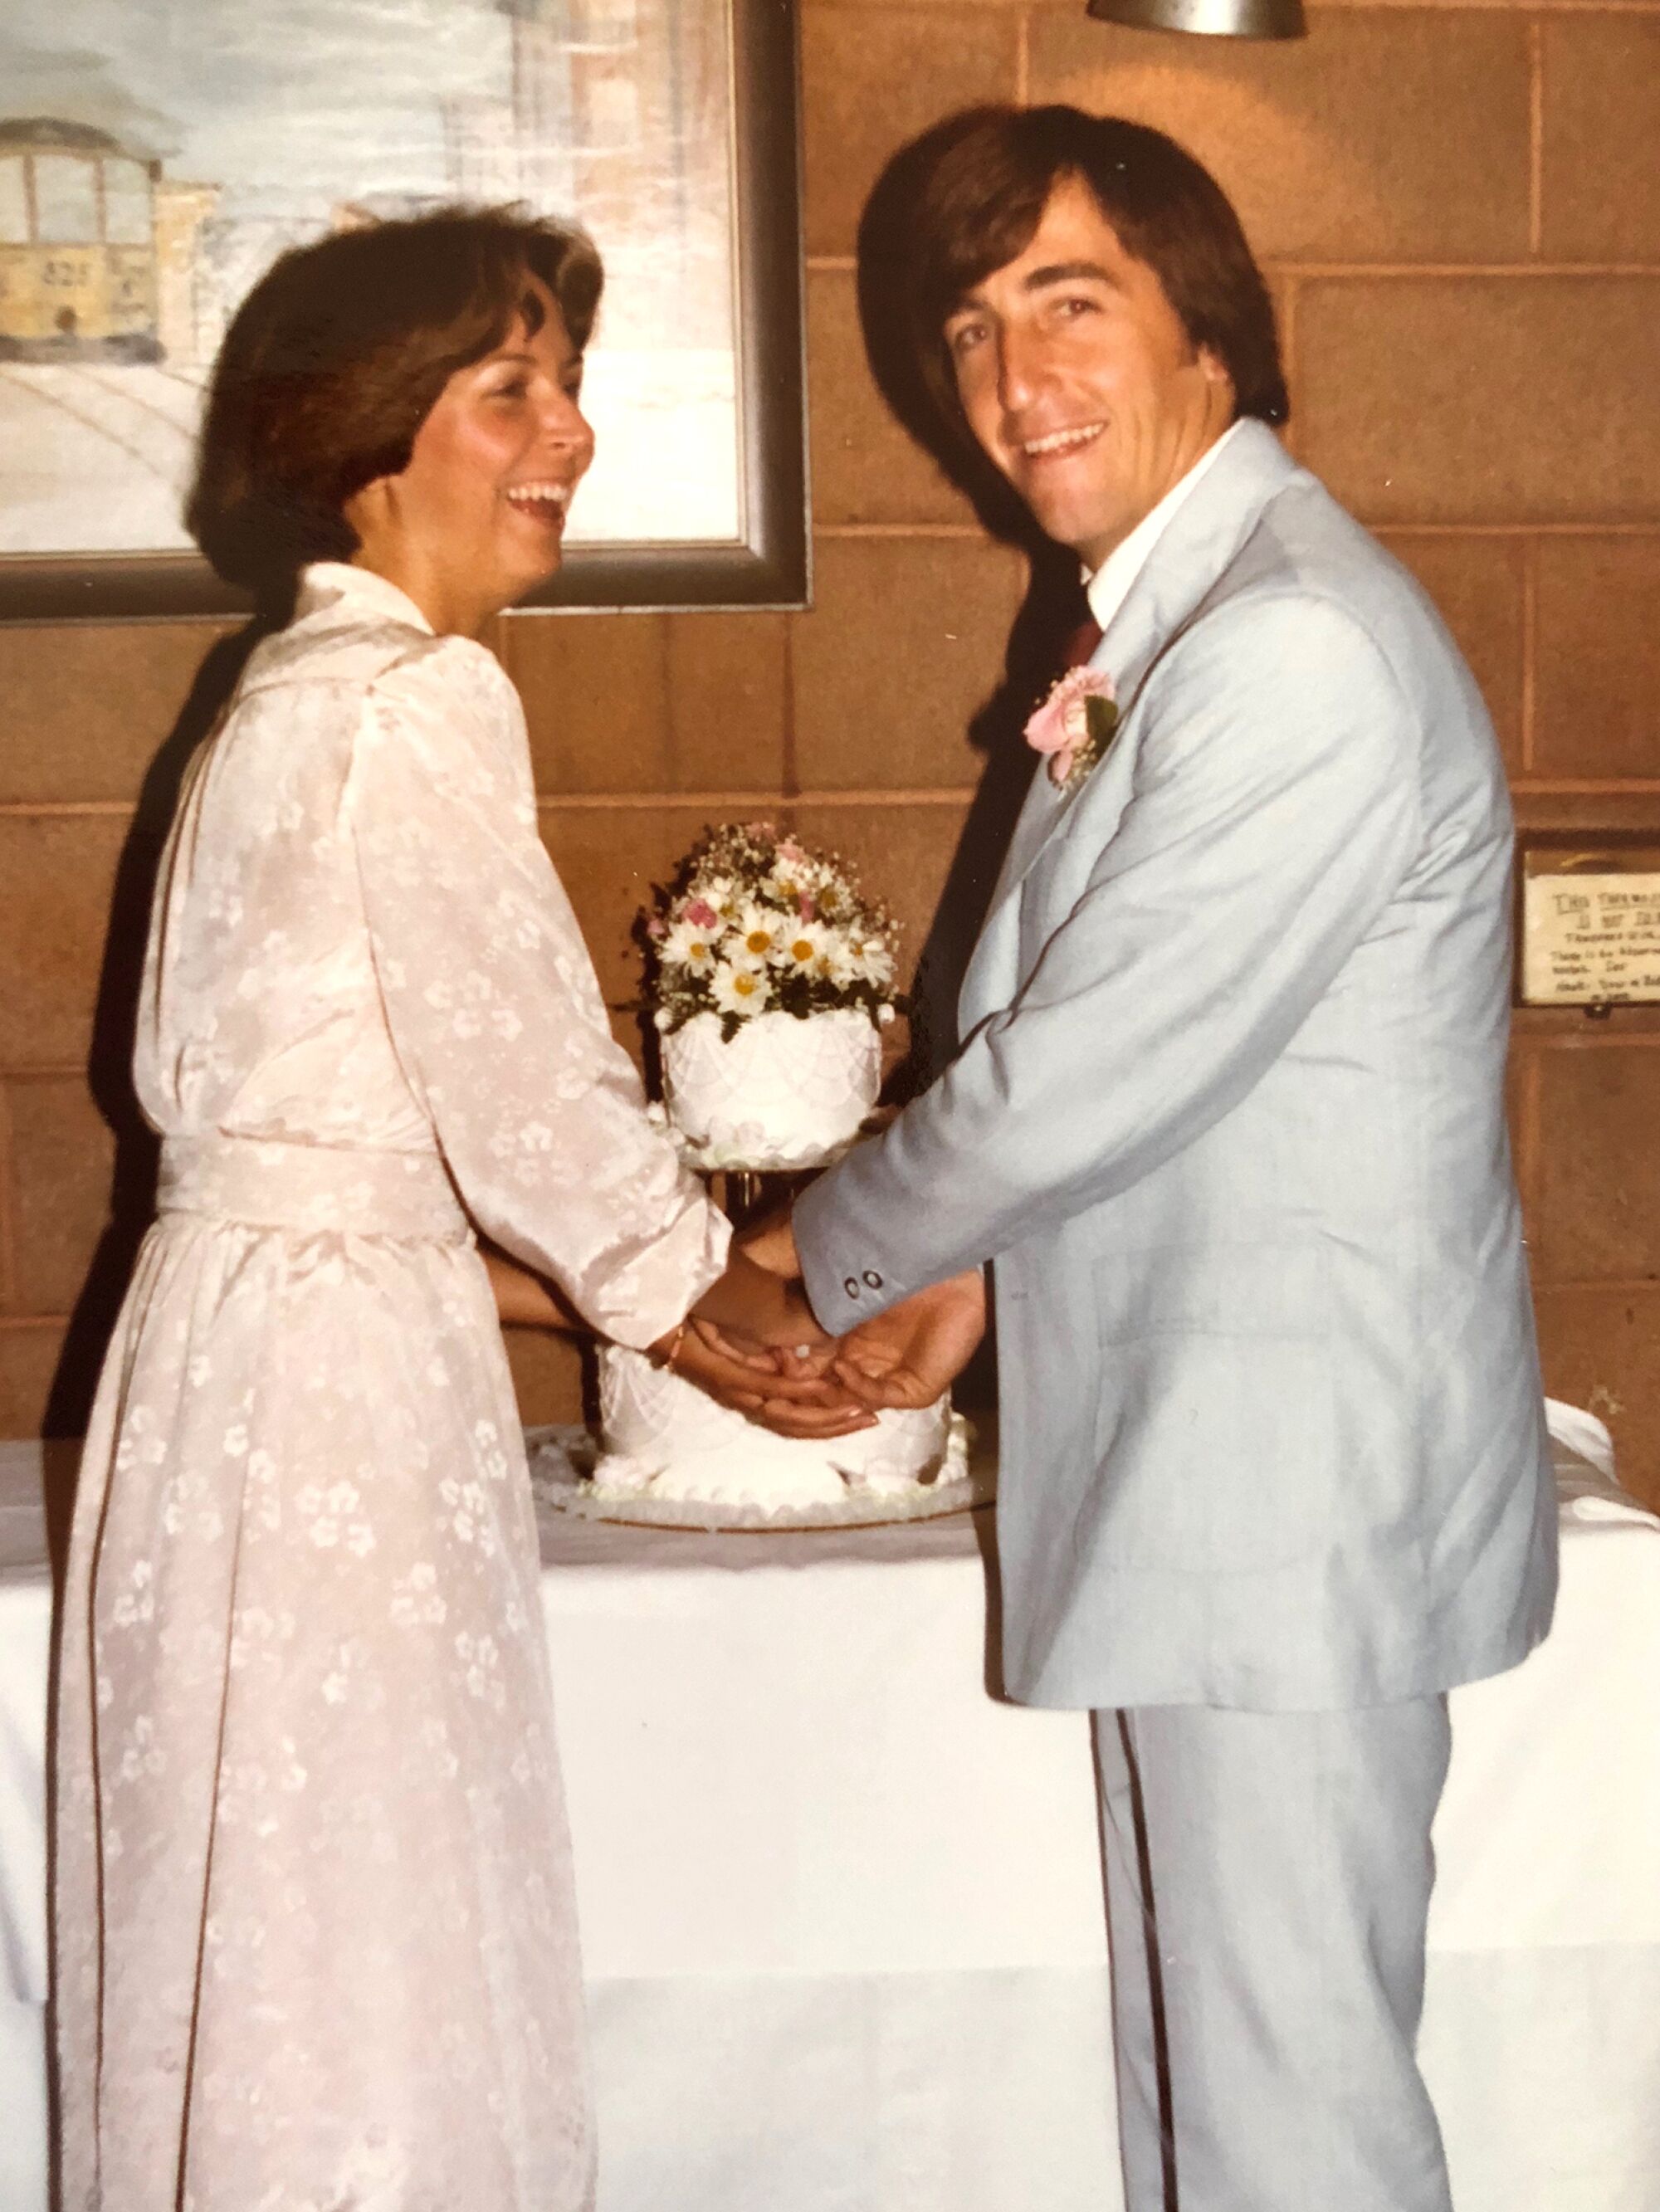 Bob Hardwick at his marriage to Gay, less than a year after the attack.